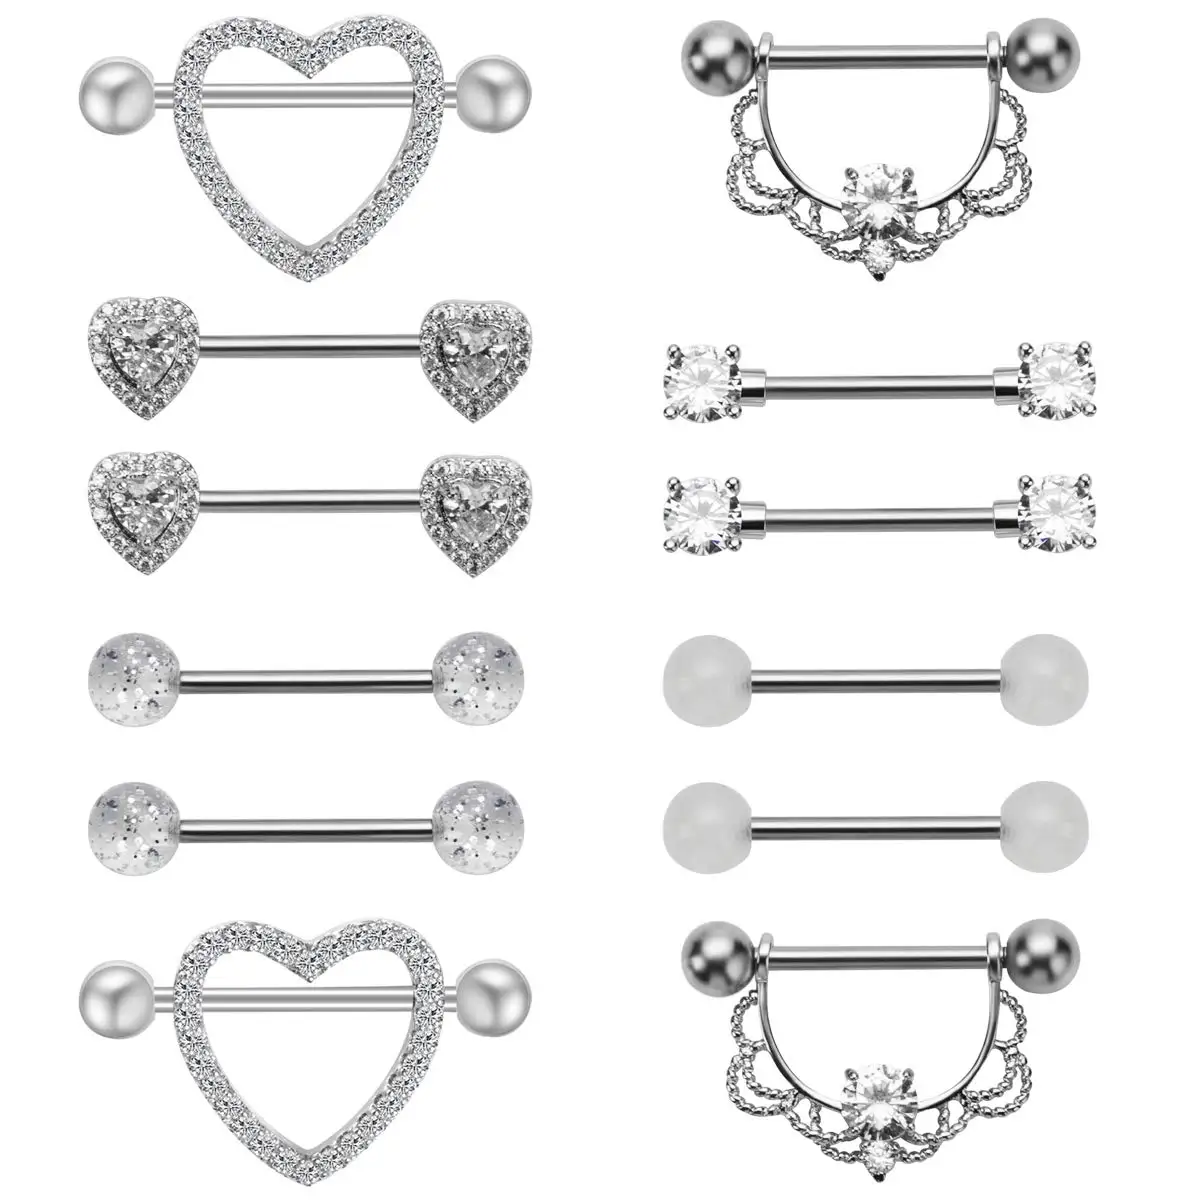 

12 Pieces Surgical Stainless Steel Acrylic Crystal Nipple Rings Tongue Ring CZ Barbell Heart-Shape Piercing Body Jewelry Woman